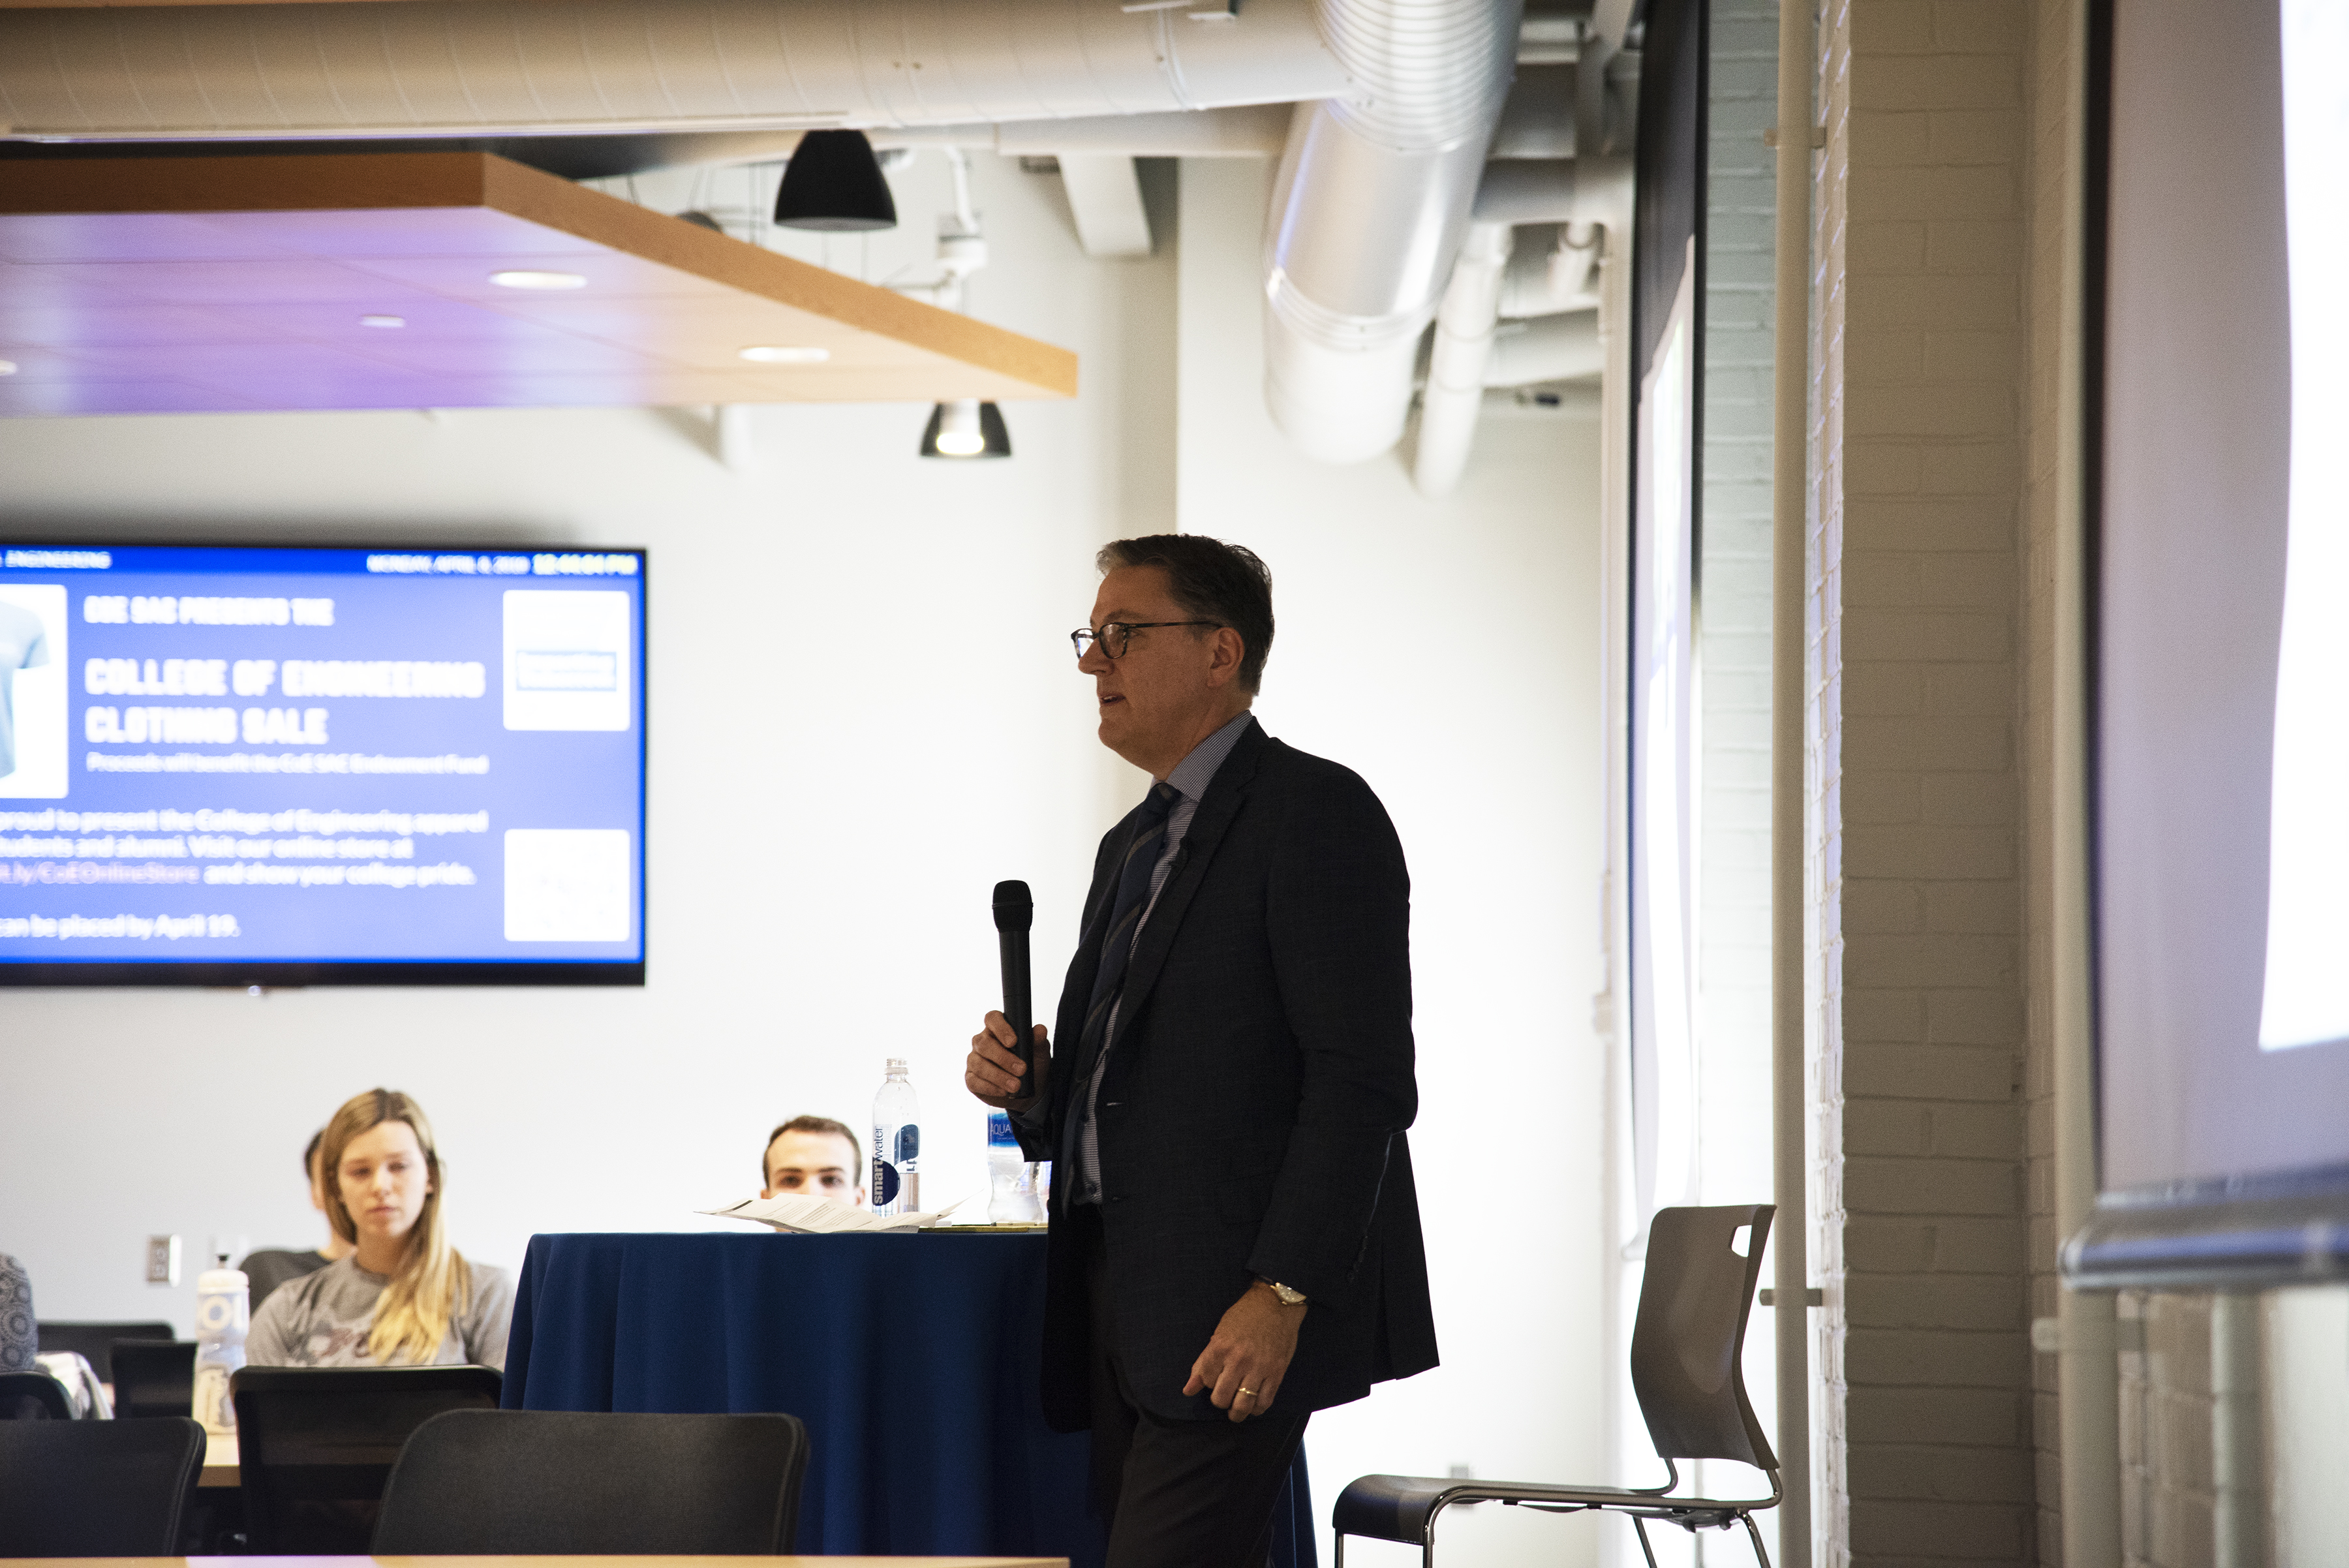 Brian T. Olsavsky, senior vice president and chief financial officer (CFO) at Amazon, addresses students in Reber Building.